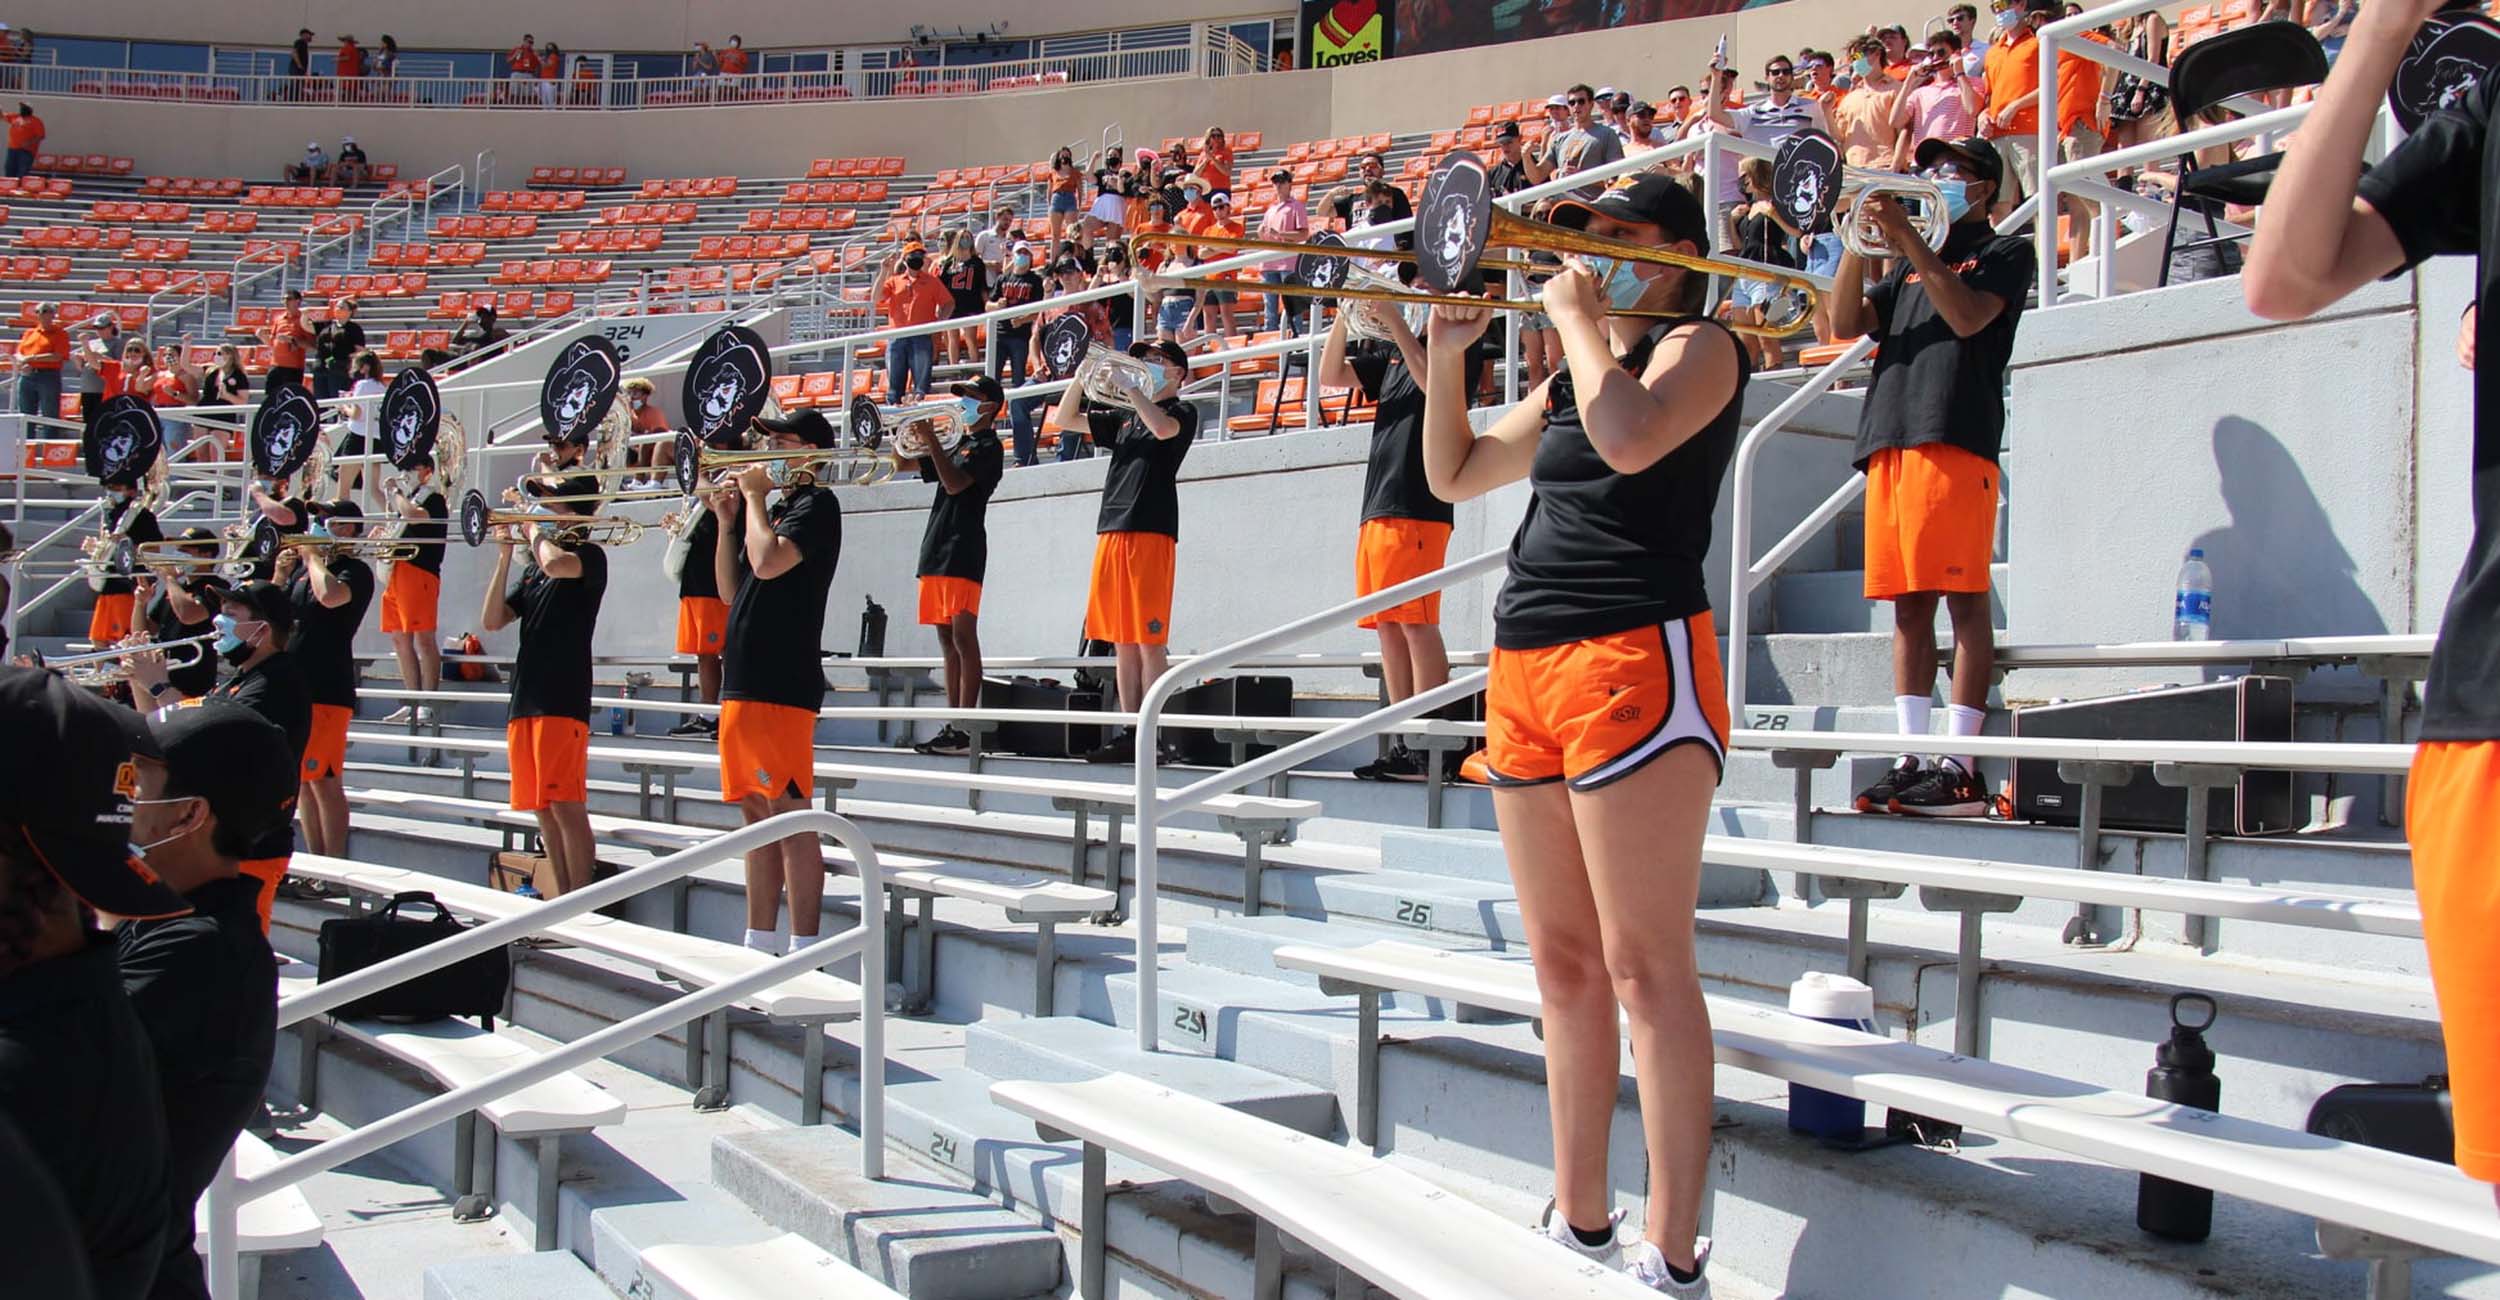 The OSU Marching Band social distances at Boone Pickens Stadium.